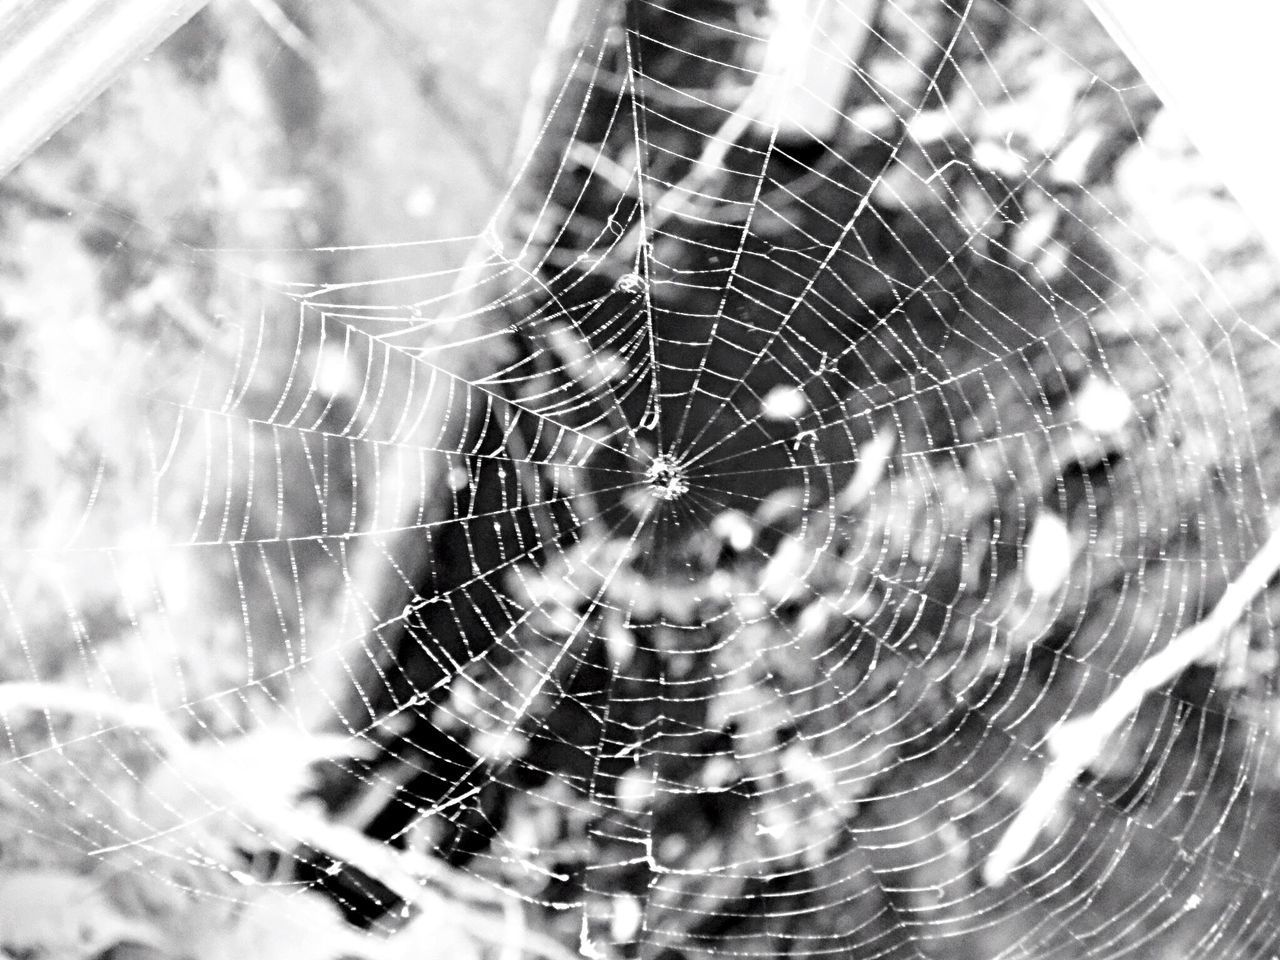 CLOSE-UP OF SPIDER BY WEB